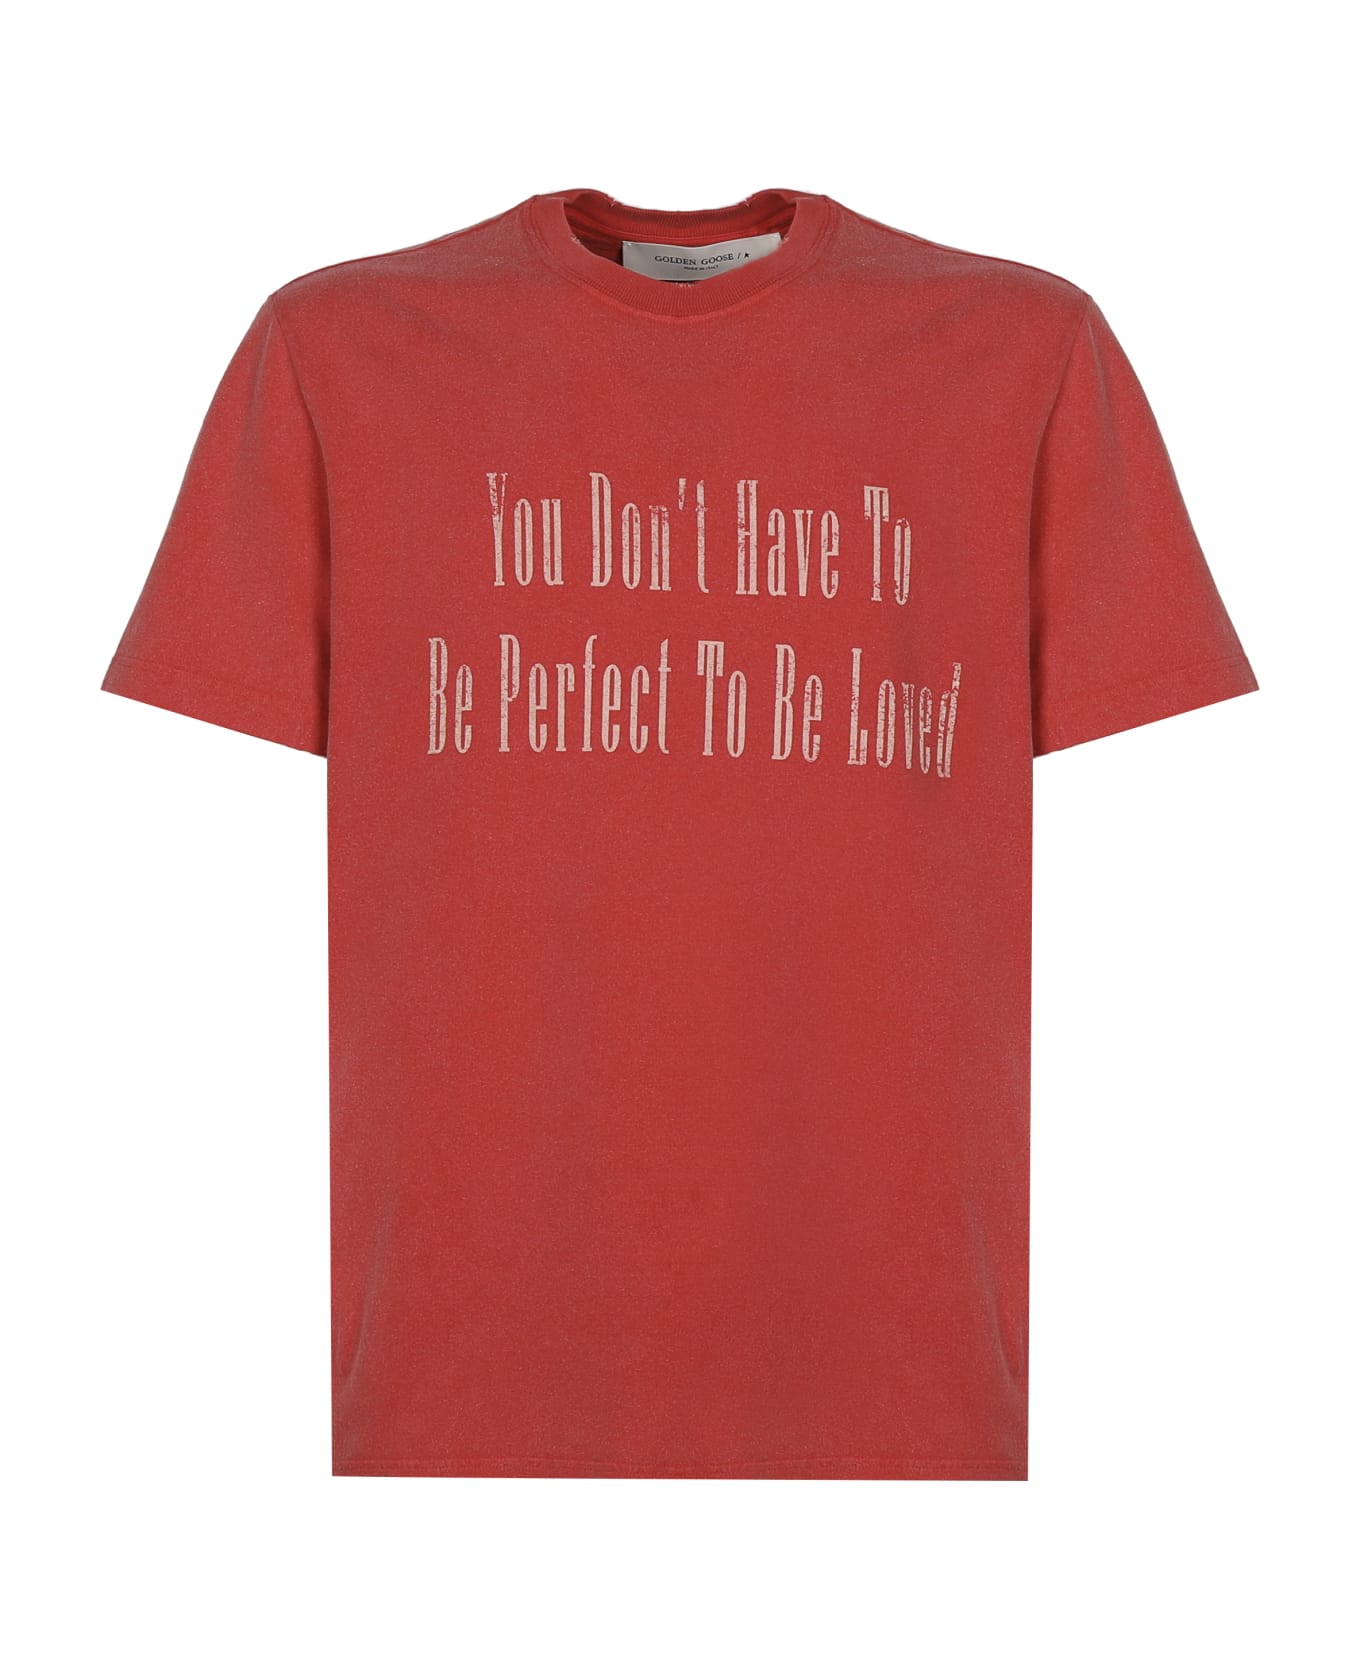 Golden Goose T-shirt With Printed Lettering - Tango red/ ecru'